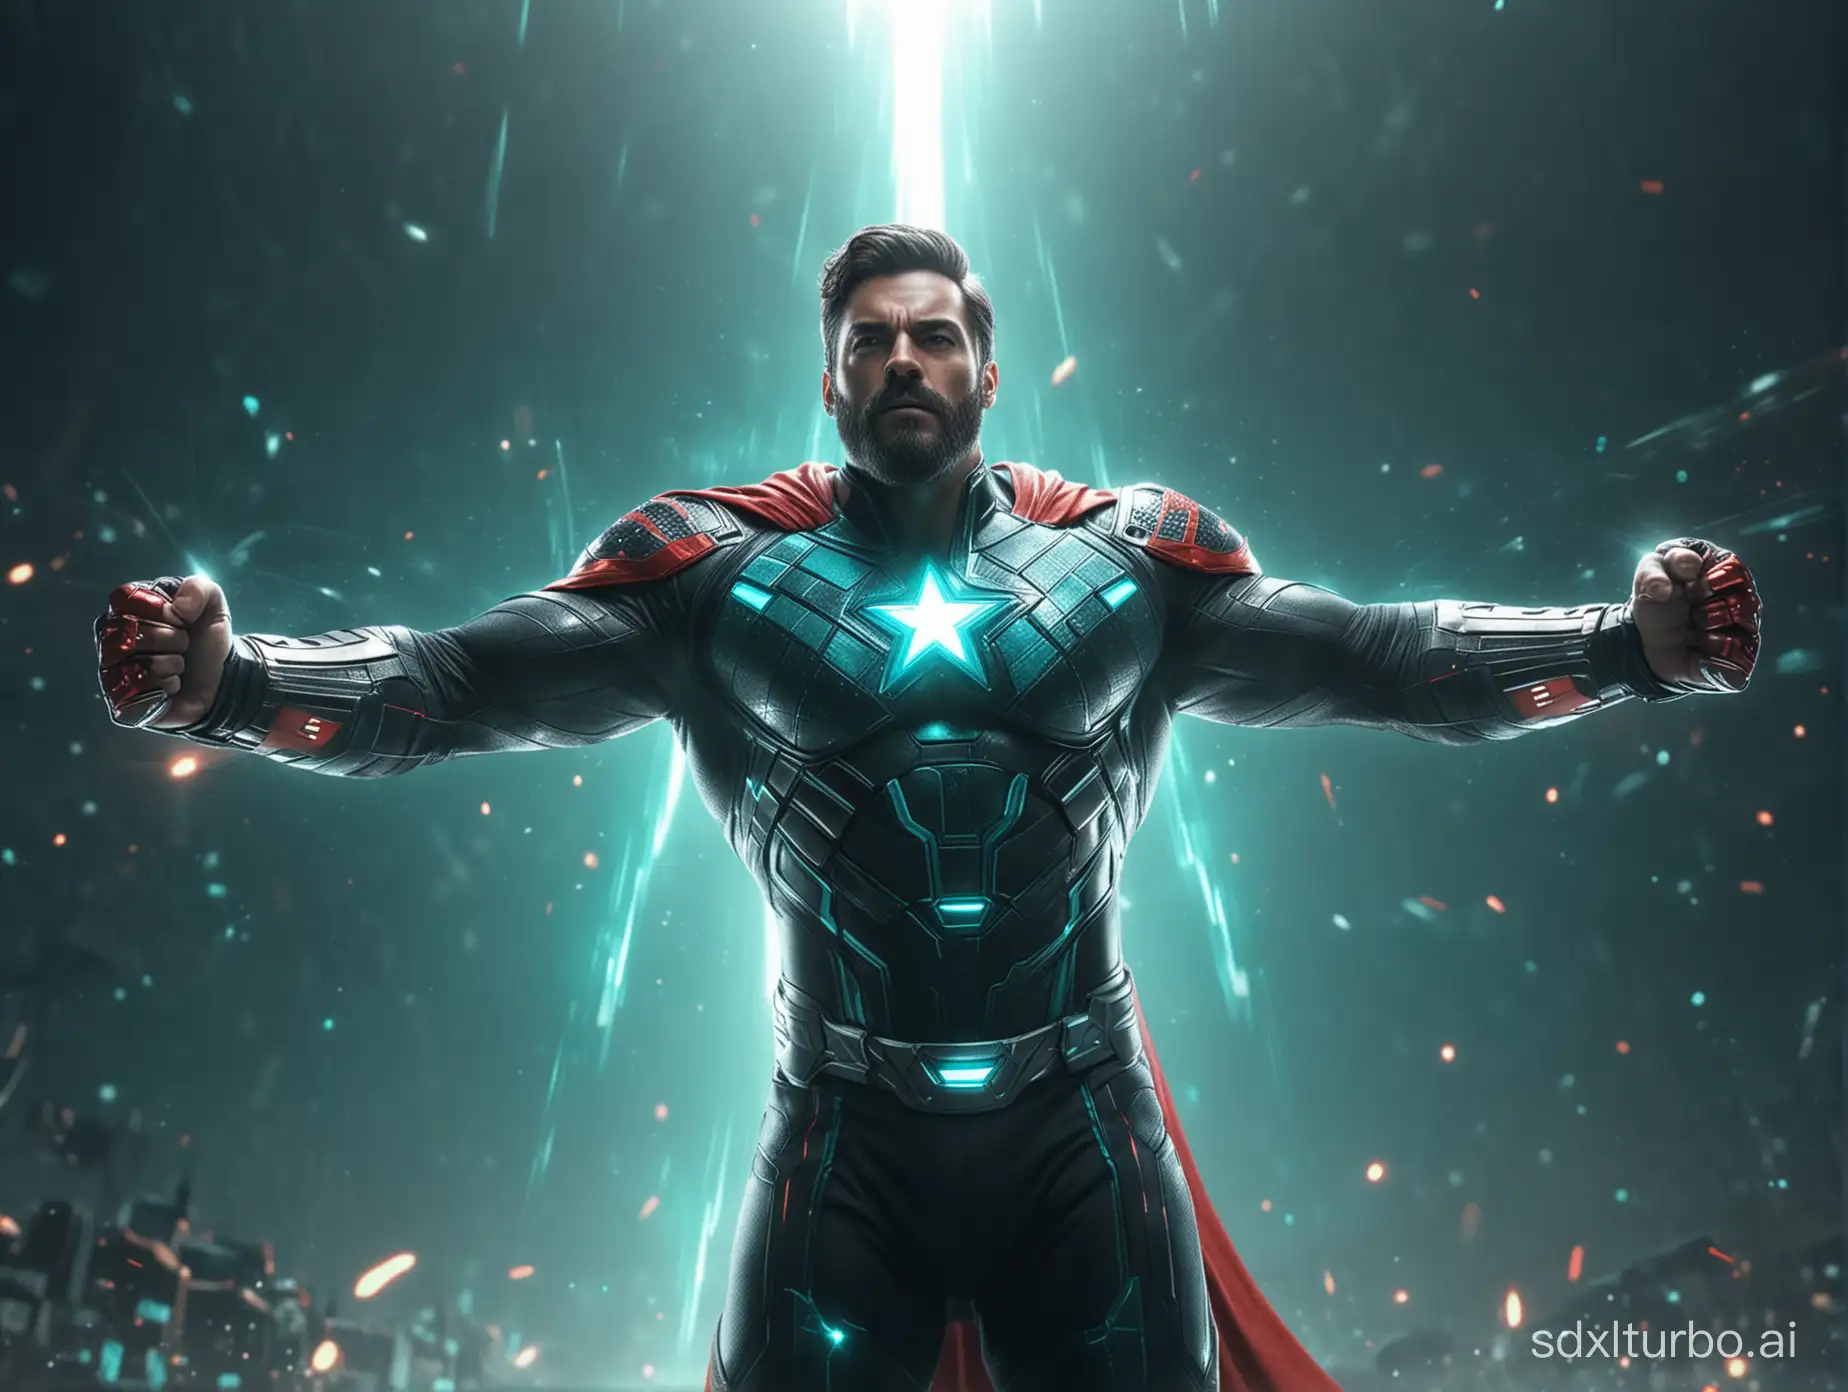 Epic movie still of a handsome muscular superhero in a futuristic hero suit with red and black checkers pattern, stubble beard, glowing star on chest, turquoise aura, the man is raising glowing fists to the side, looking into camera, turquoise cape flowing to his side, futuristic, 8k, epic, cinematic, full body visible, cinematic, photo